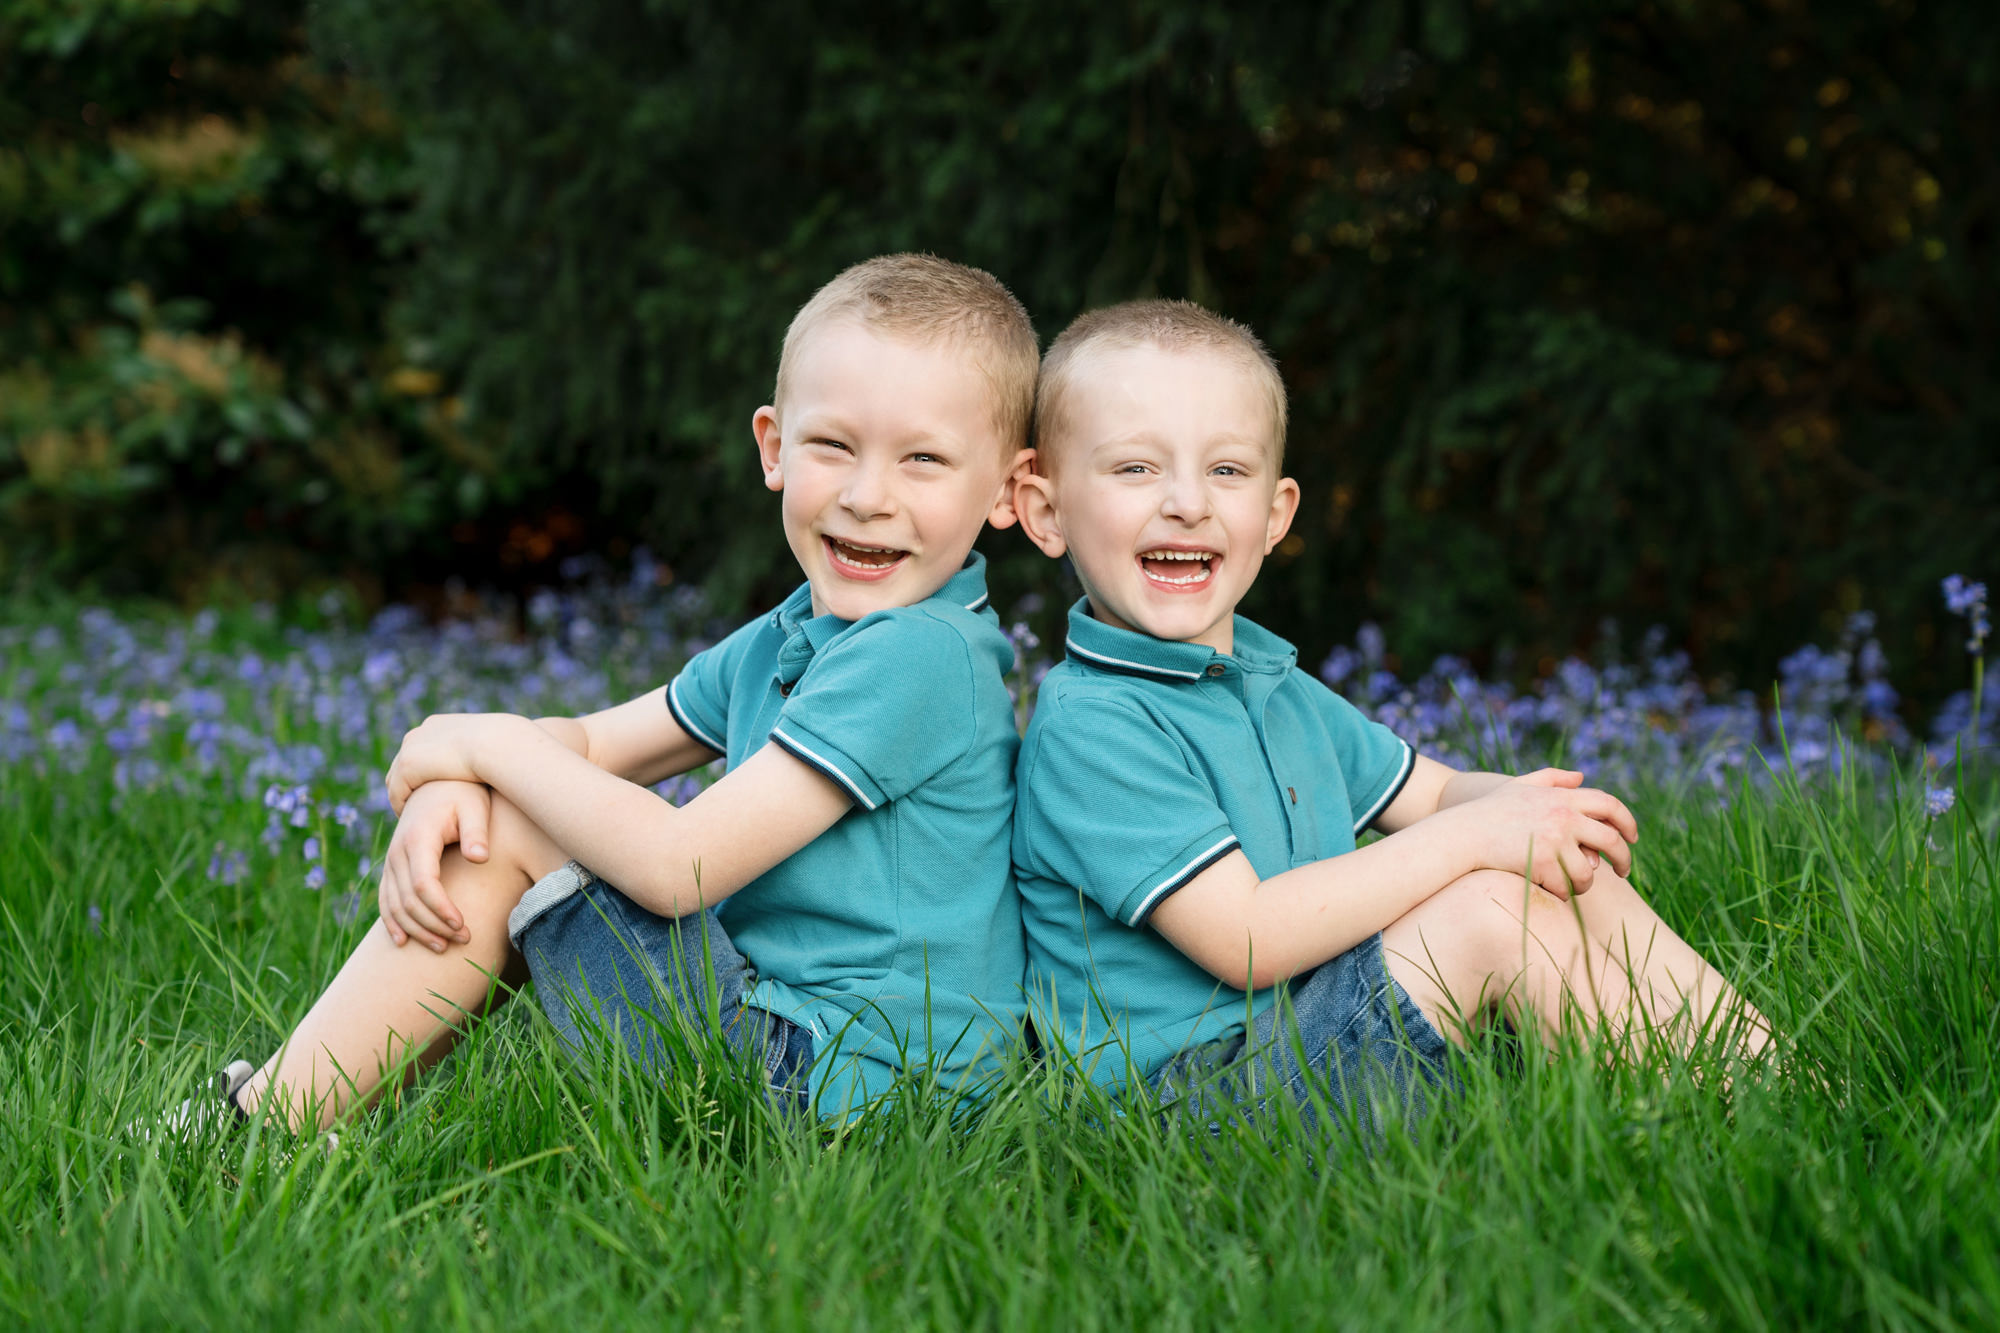 Bluebell Childrens Photography based in Surrey